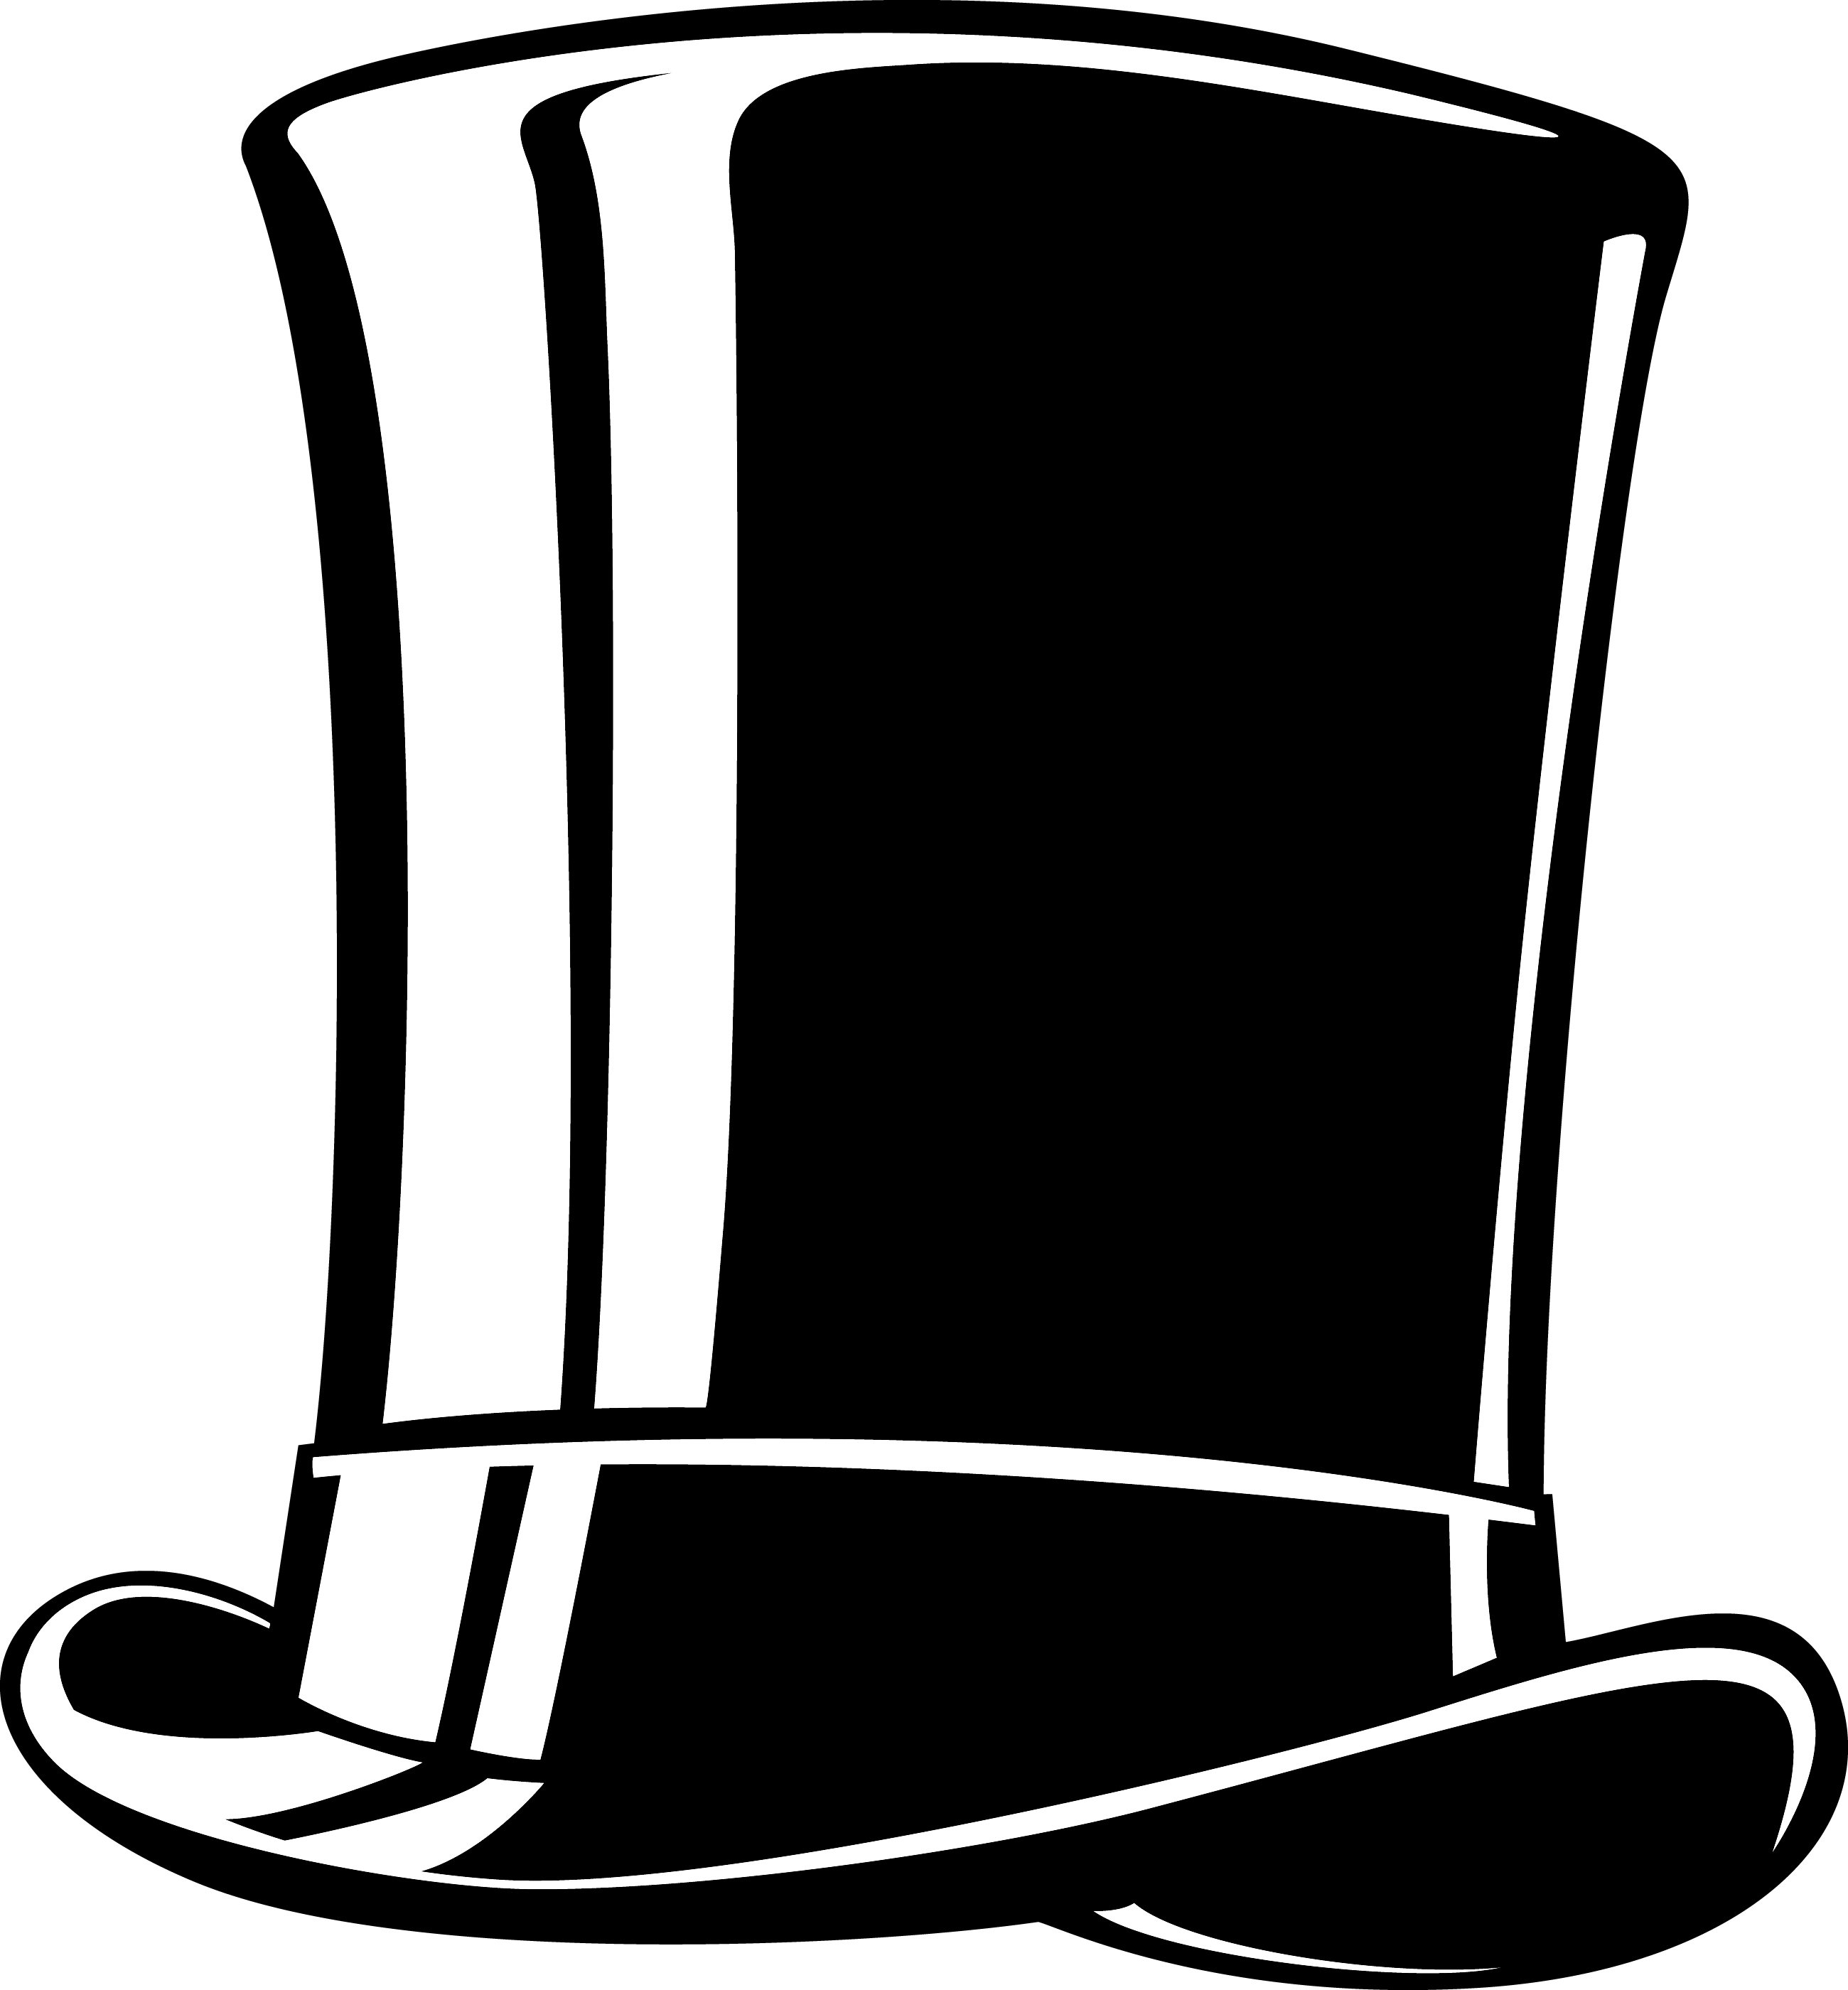 hat clipart black and white - Clip Art Library